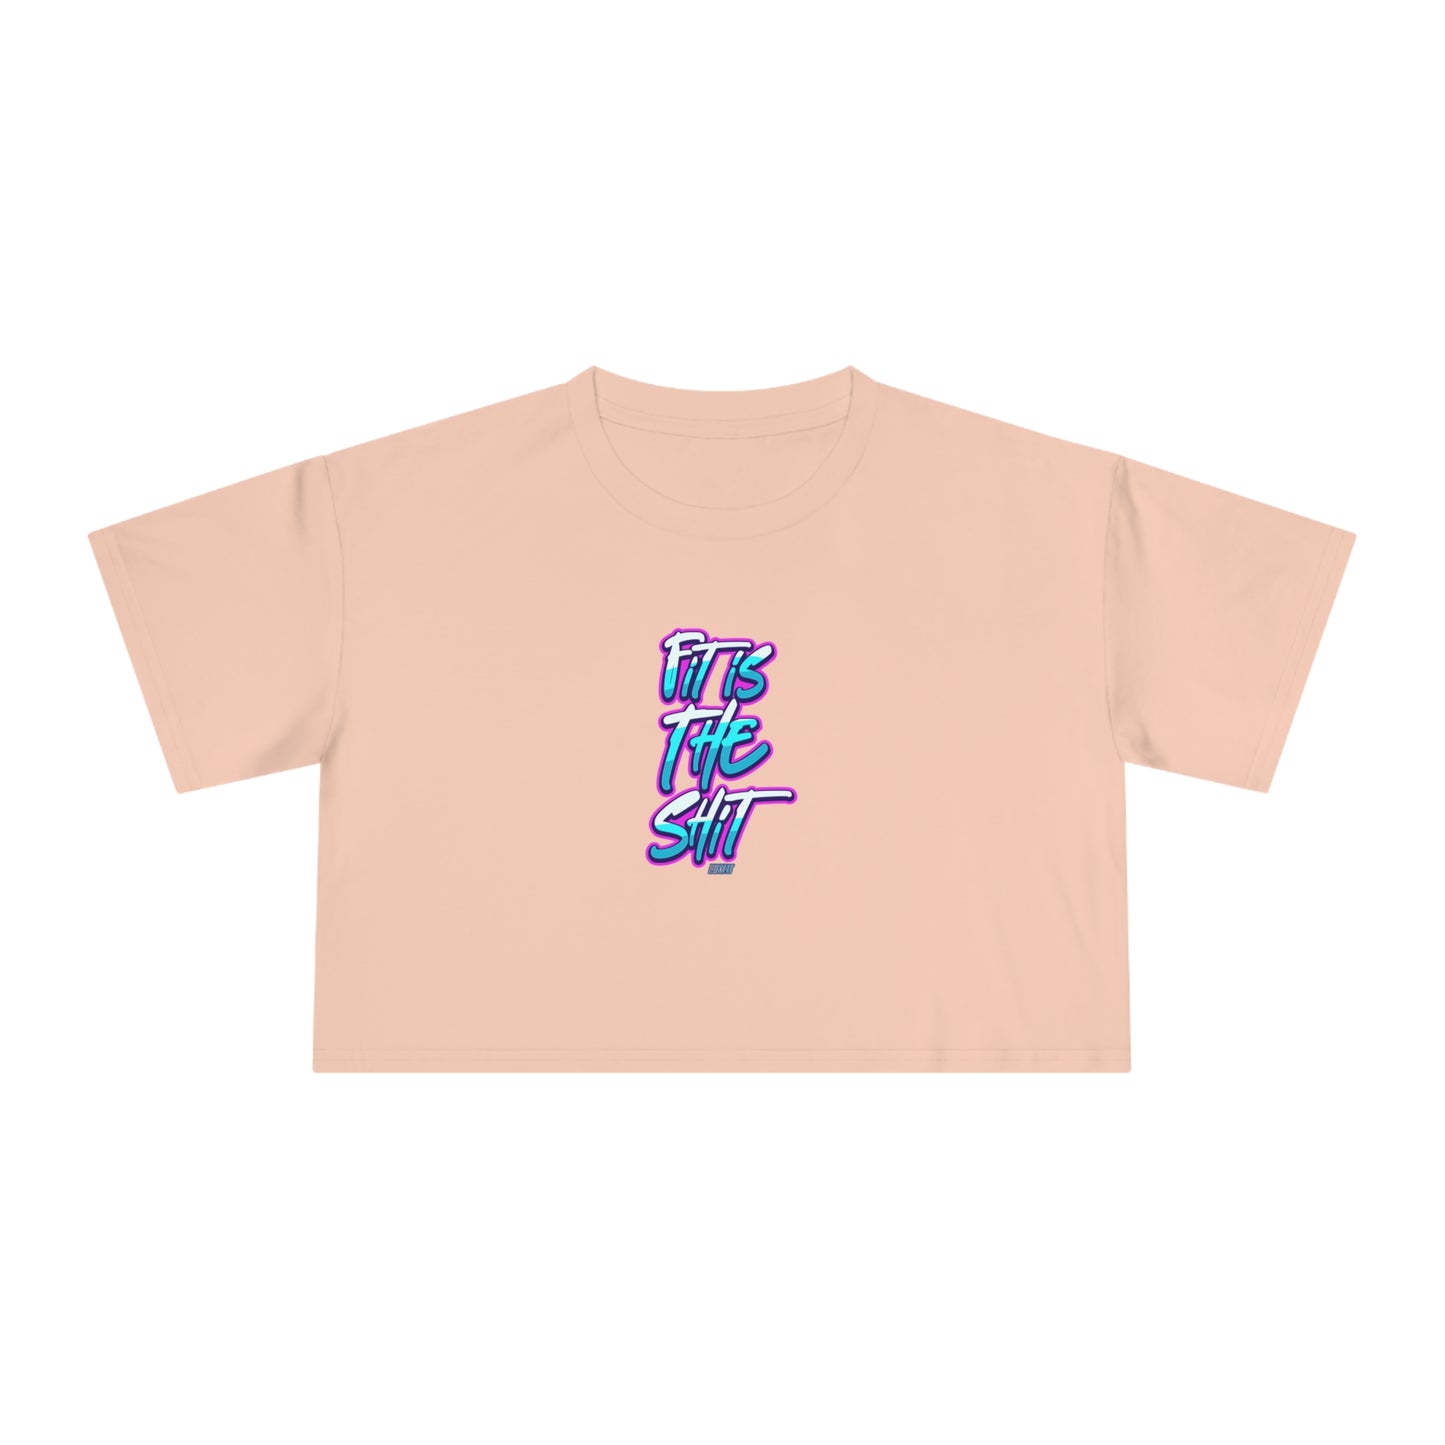 WOMENS BOXFIT FITS THE SHIT CROPPED TEE